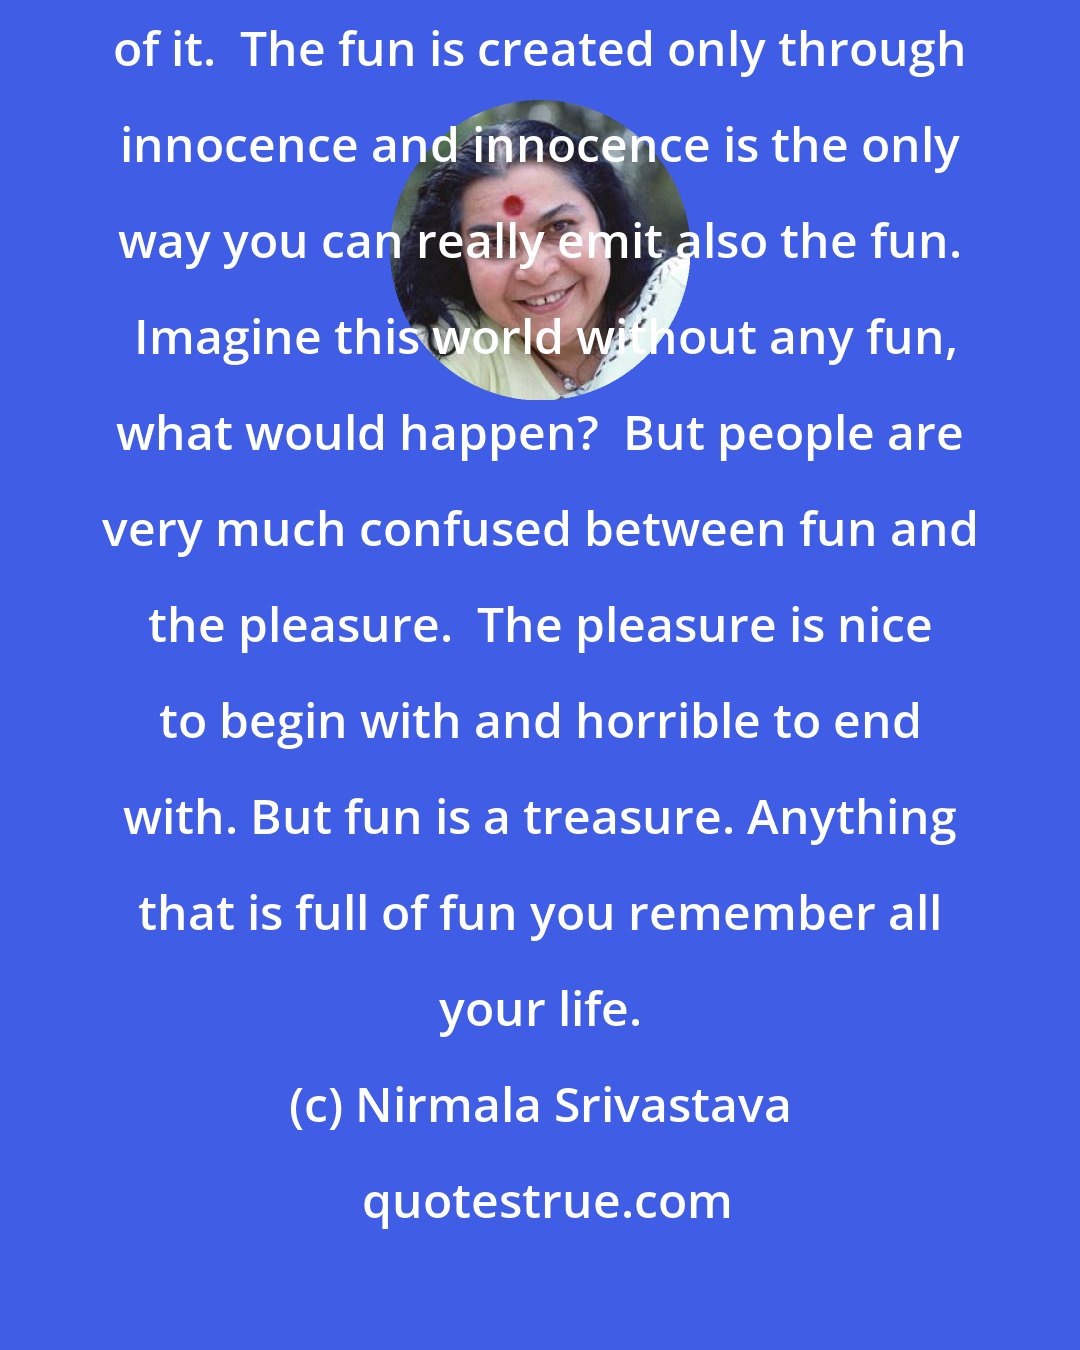 Nirmala Srivastava: Innocence is the way you really give fun to others, create the fun part of it.  The fun is created only through innocence and innocence is the only way you can really emit also the fun.  Imagine this world without any fun, what would happen?  But people are very much confused between fun and the pleasure.  The pleasure is nice to begin with and horrible to end with. But fun is a treasure. Anything that is full of fun you remember all your life.